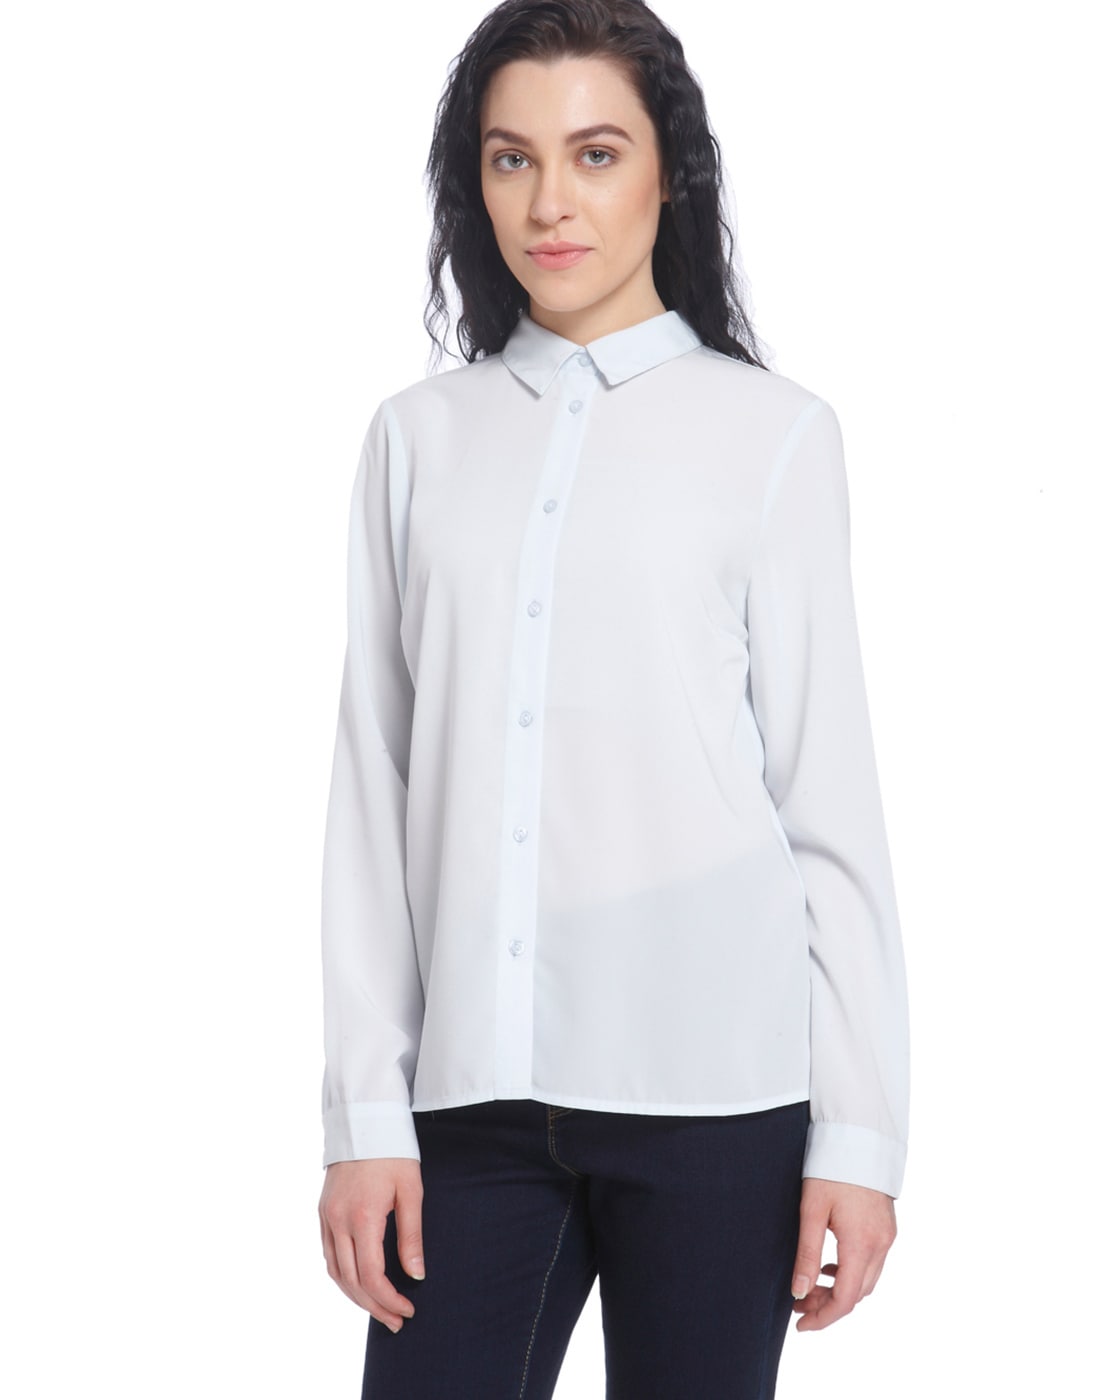 Buy silver Shirts for Women by Online Ajio.com